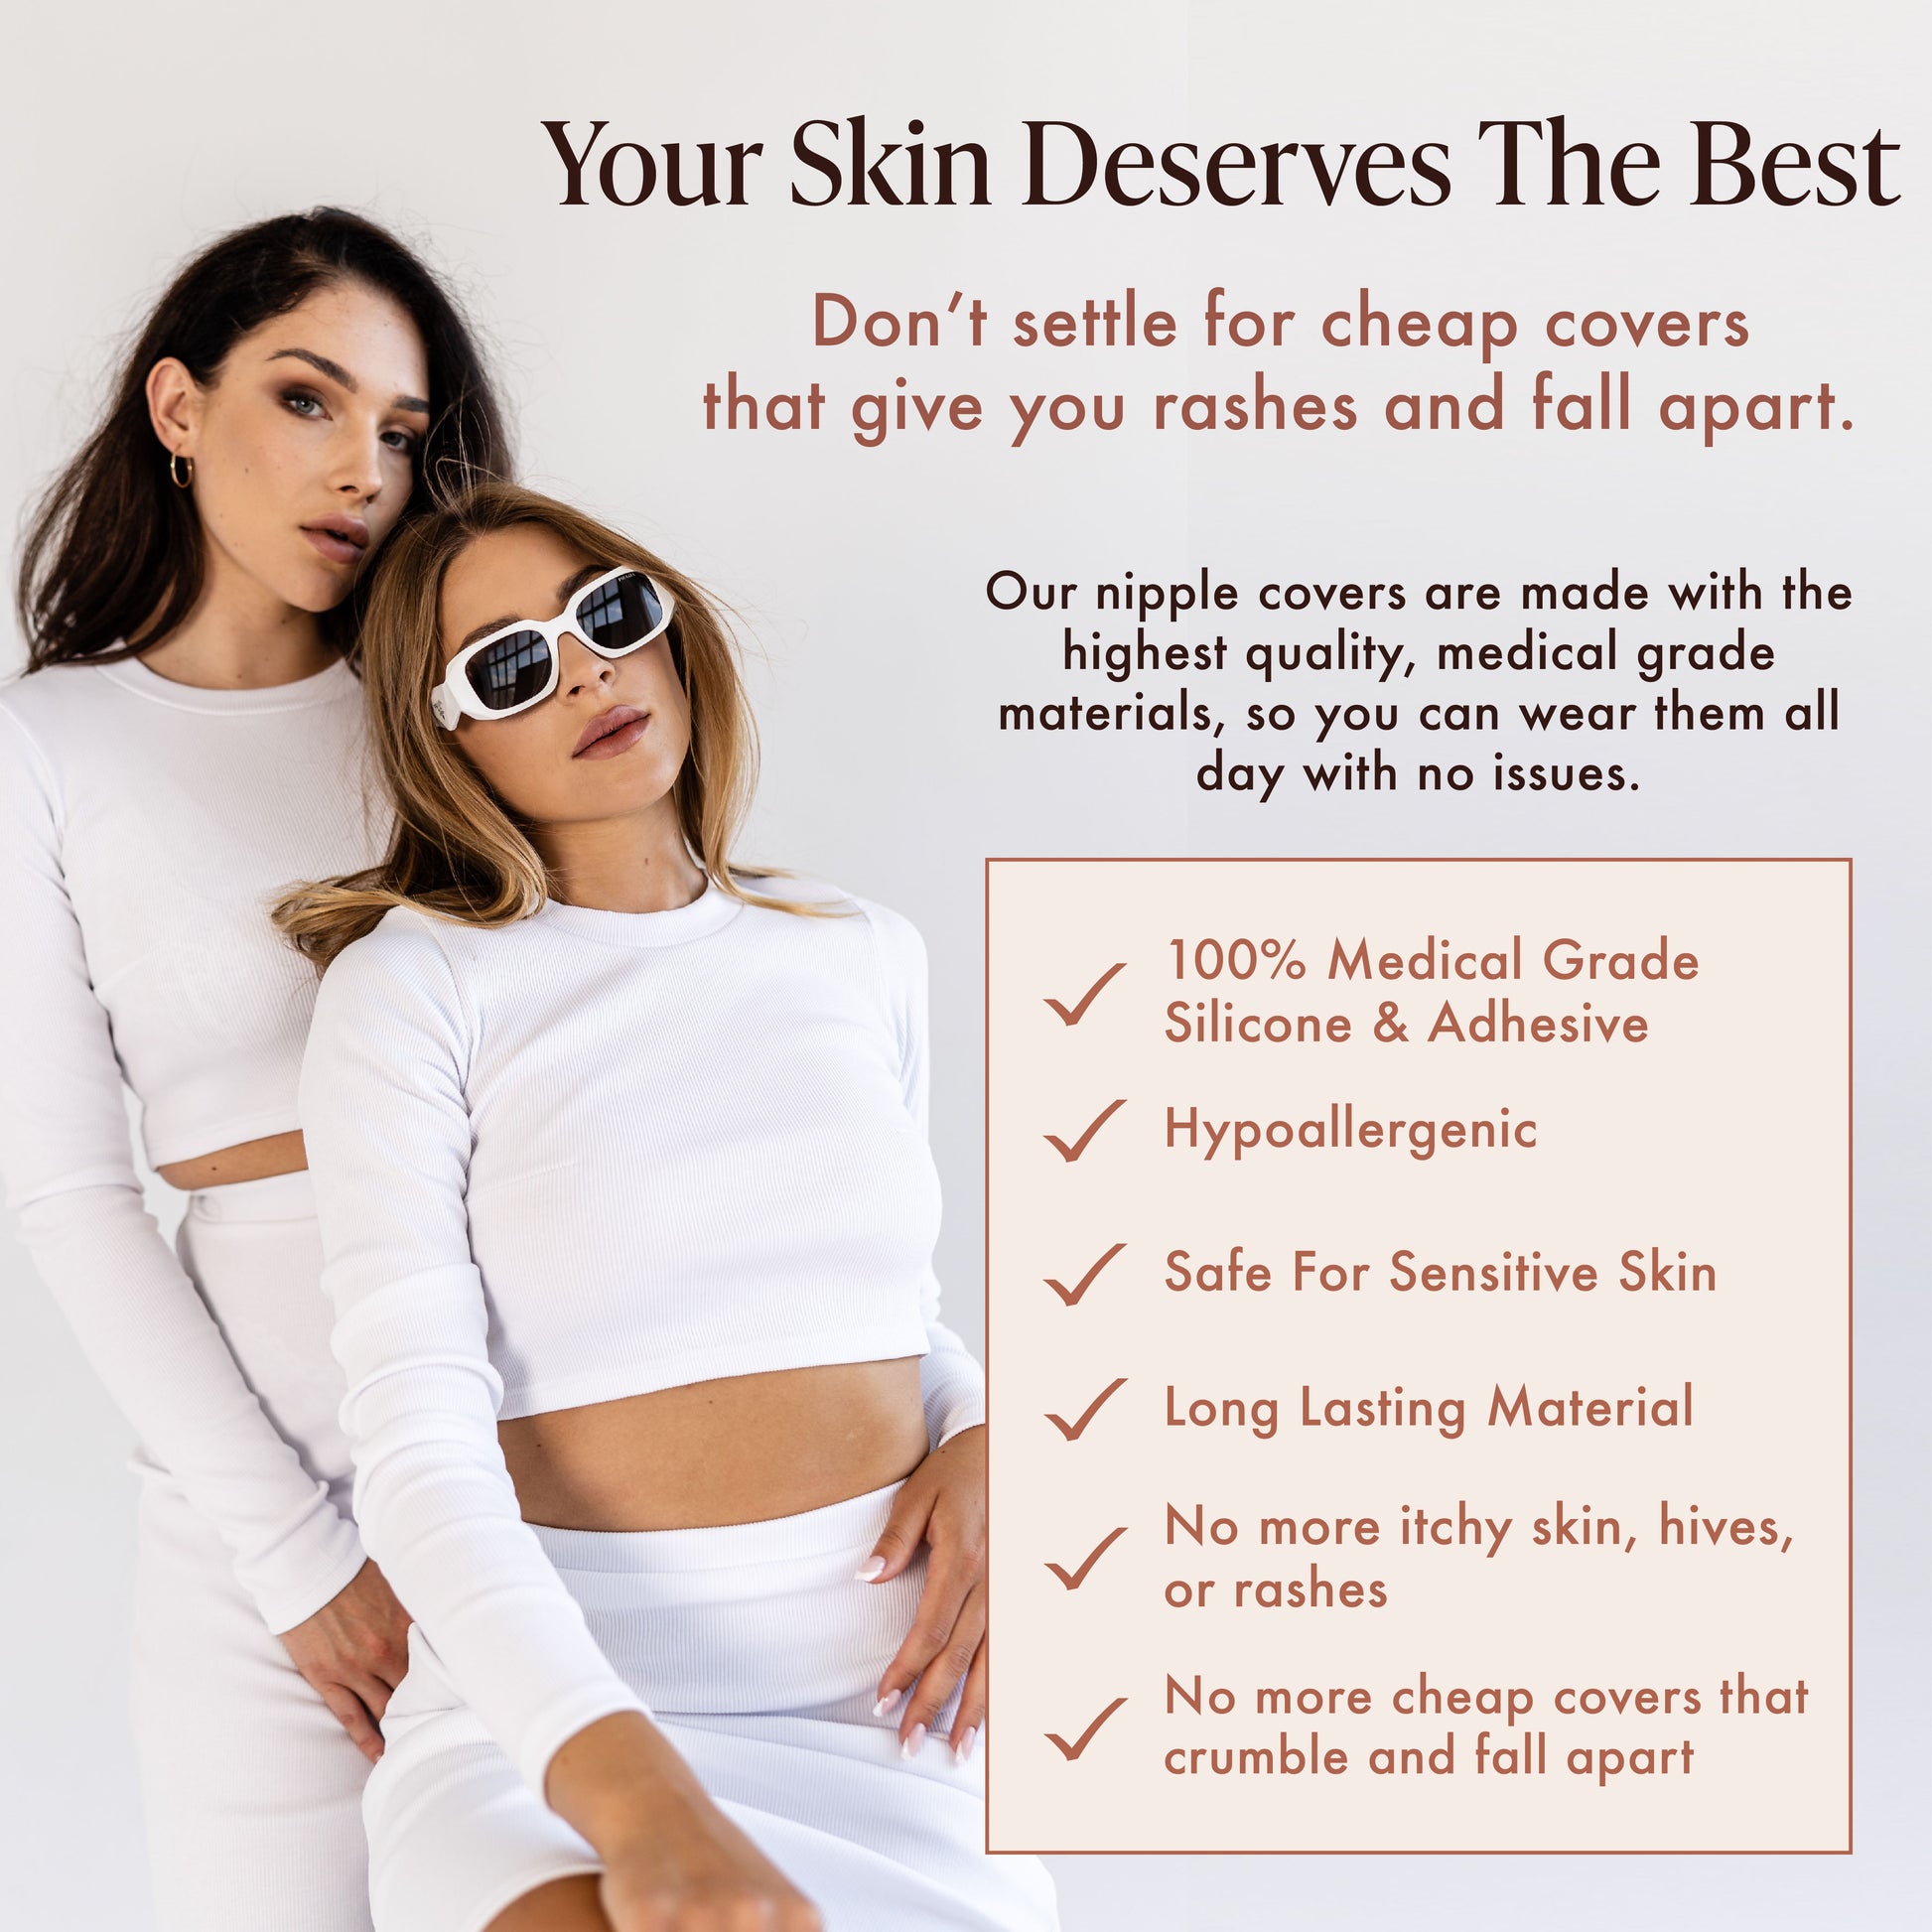 Two models wearing nipple covers and graphic text talking about the product quality